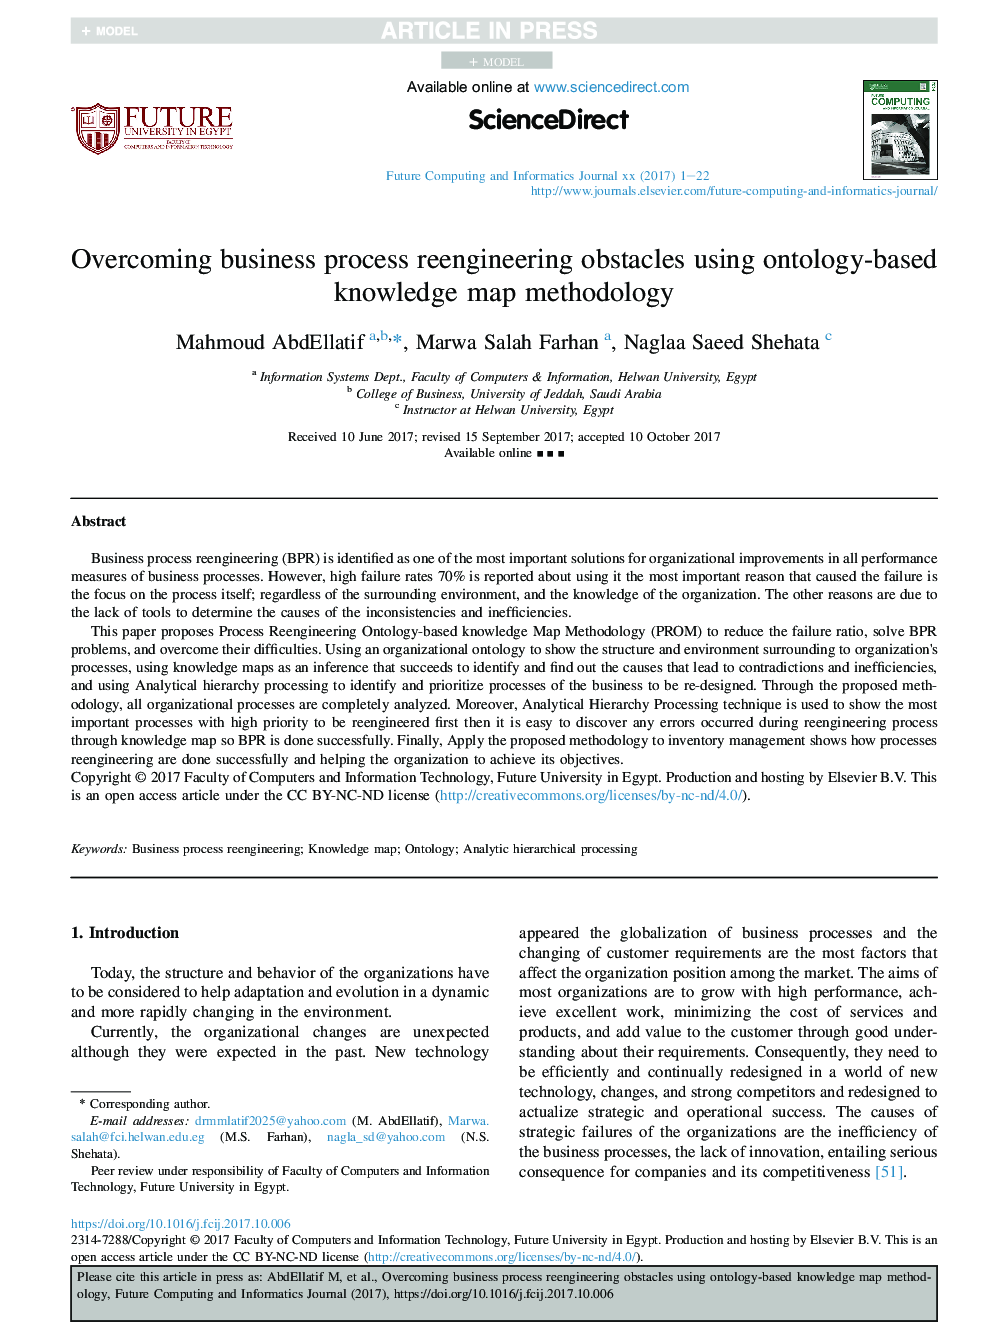 Overcoming business process reengineering obstacles using ontology-based knowledge map methodology